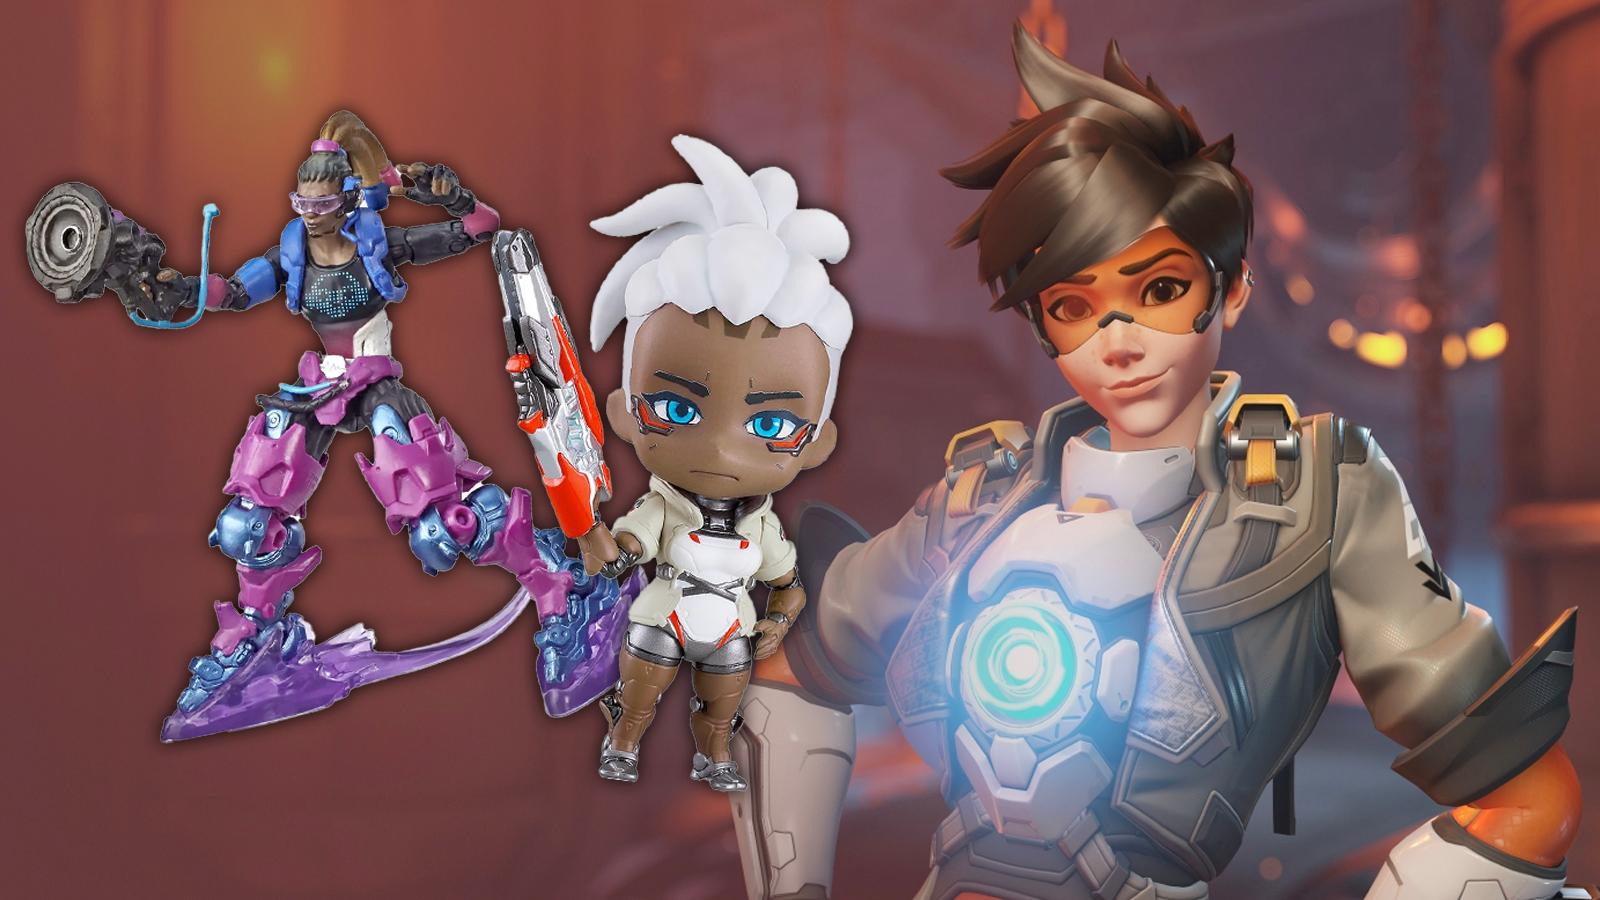 tracer from overwatch next to two figures from the franchise